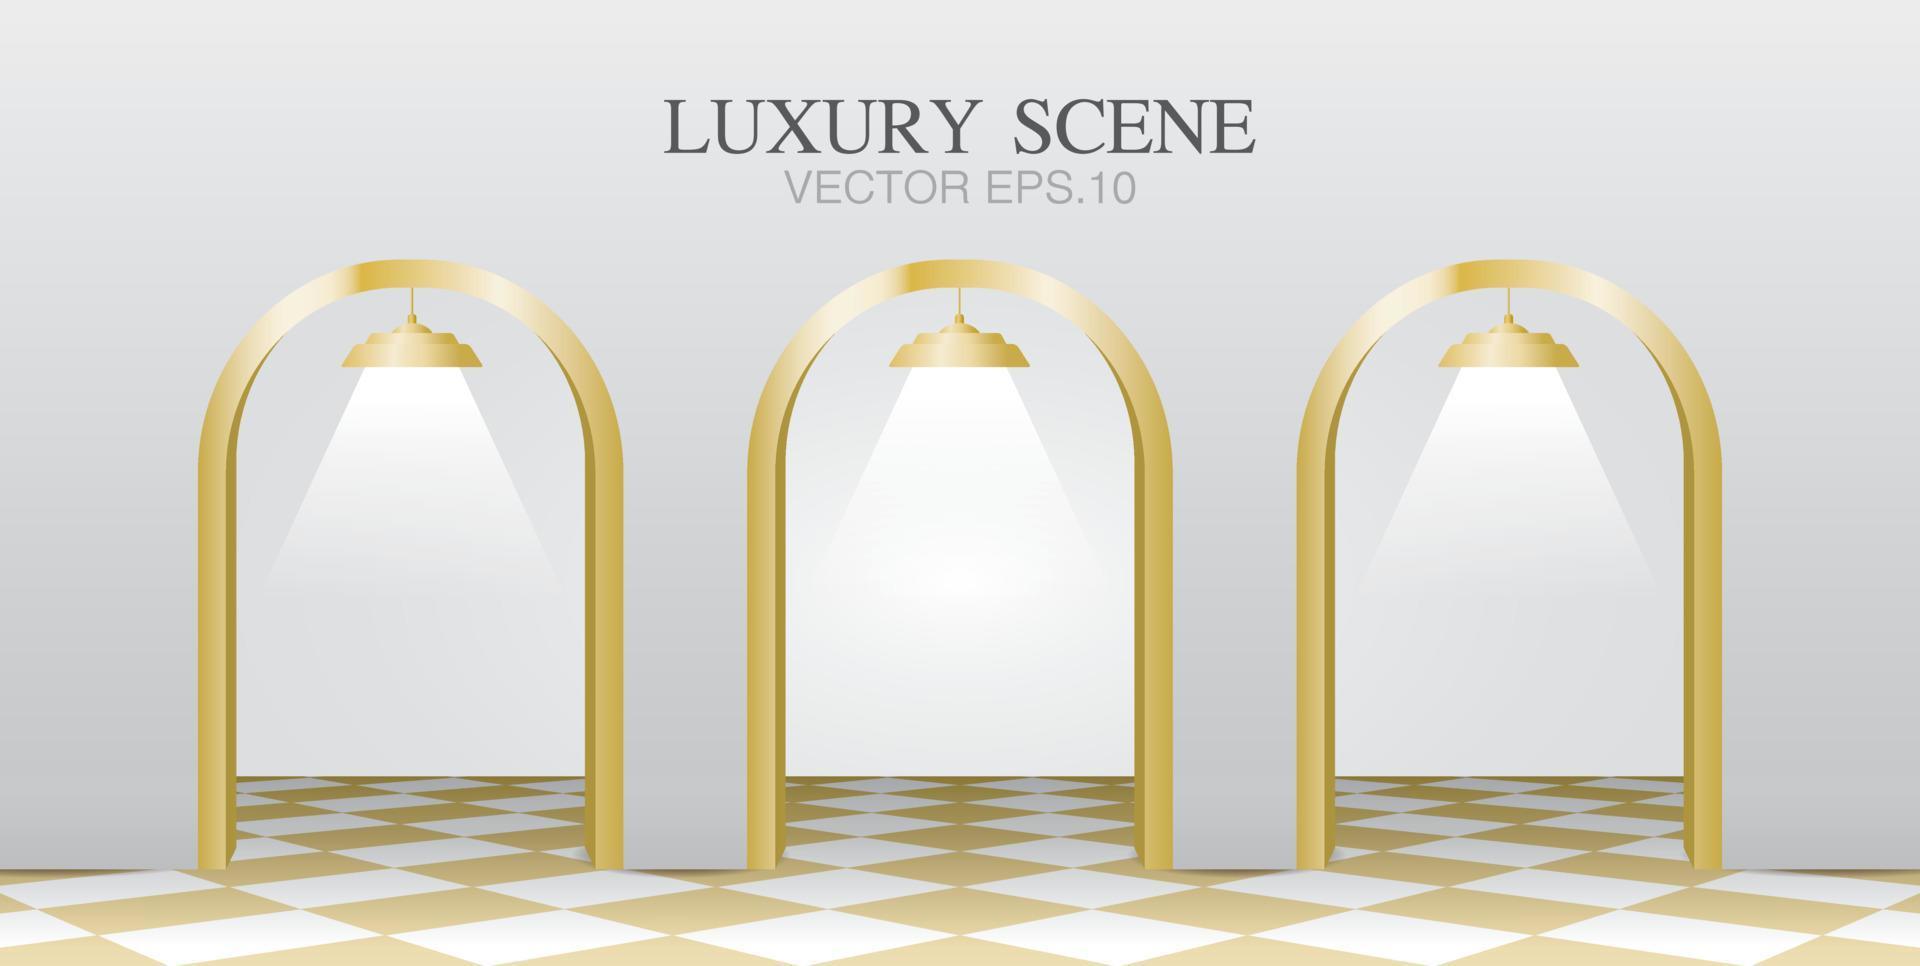 luxury scene contains golden arch and chess pattern floor 3D illustration vector for putting your object.